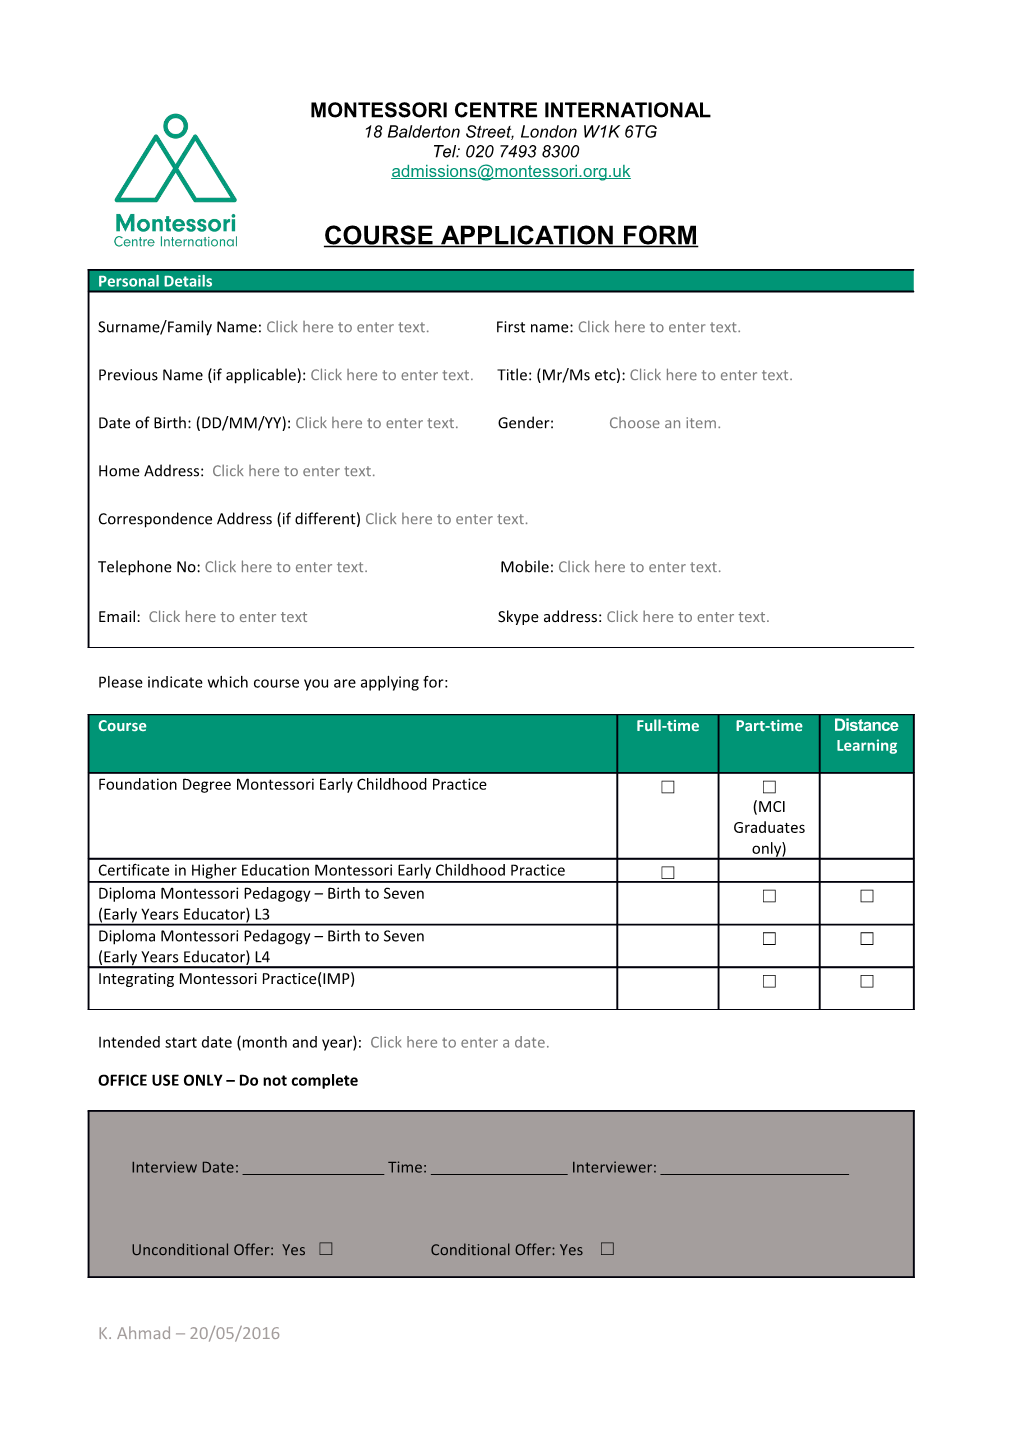 Please Indicate Which Course You Are Applying For s2